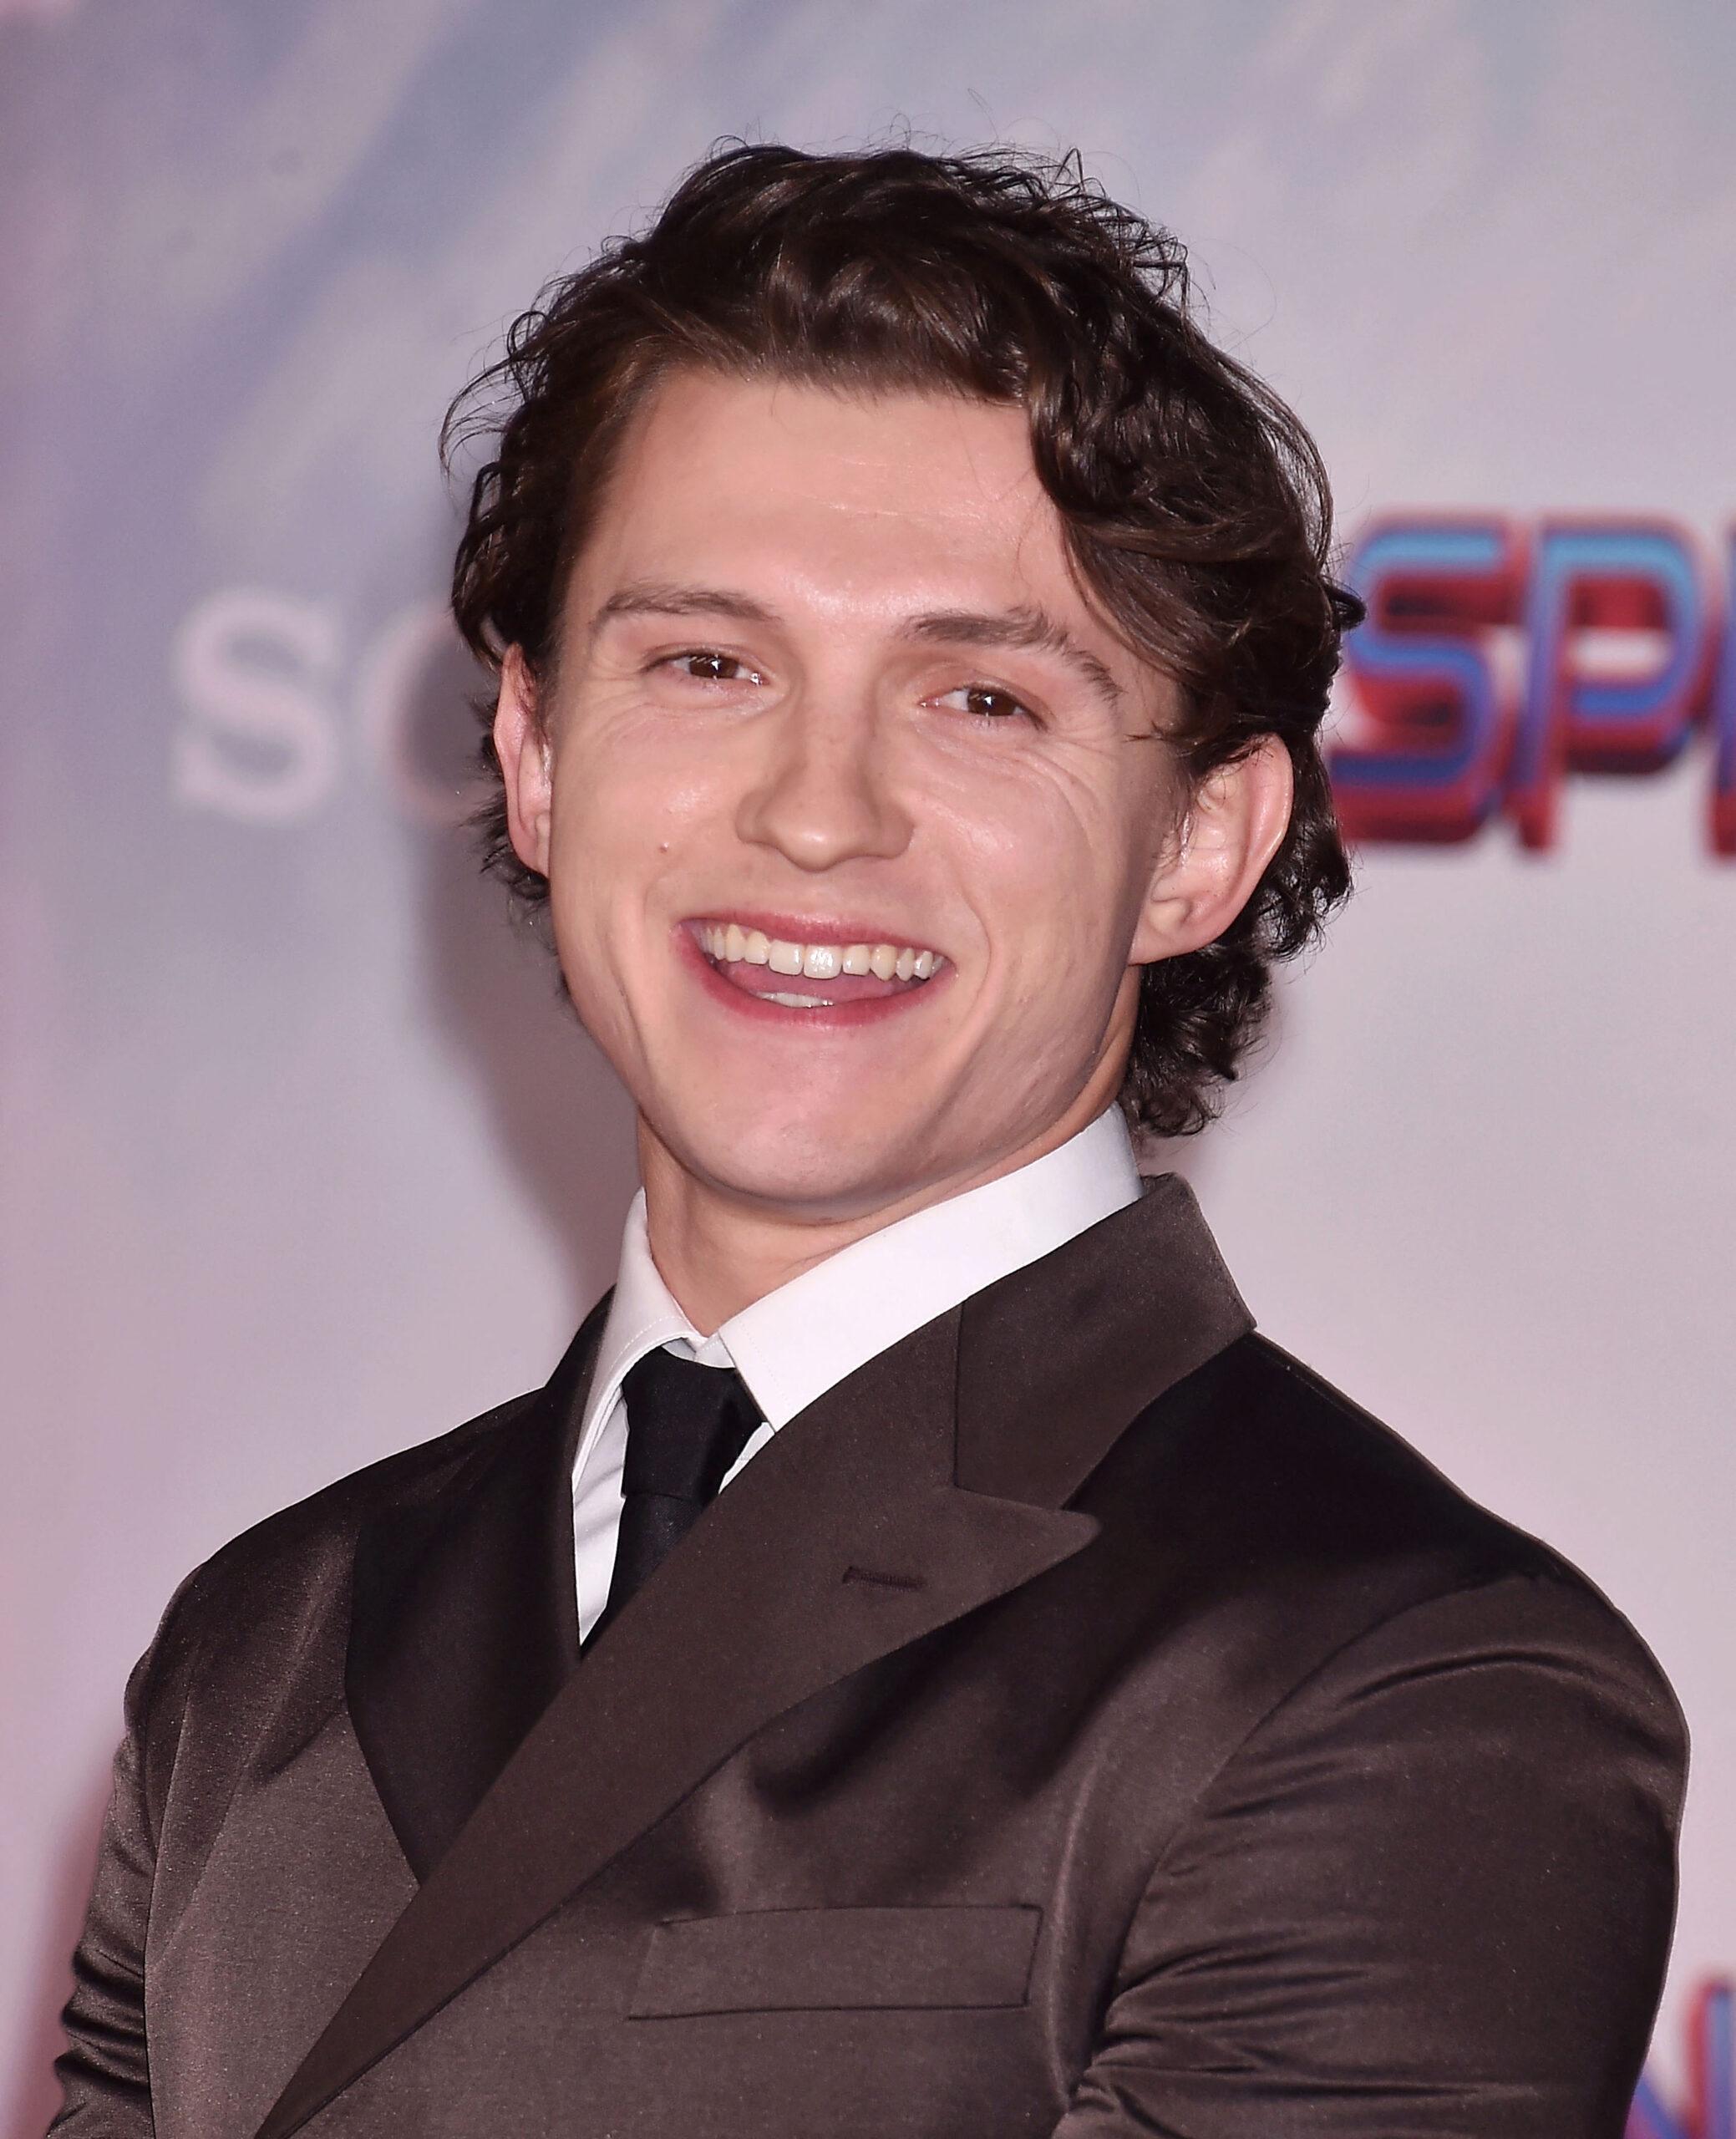 Tom Holland nearly bopped himself waving the chequered flag